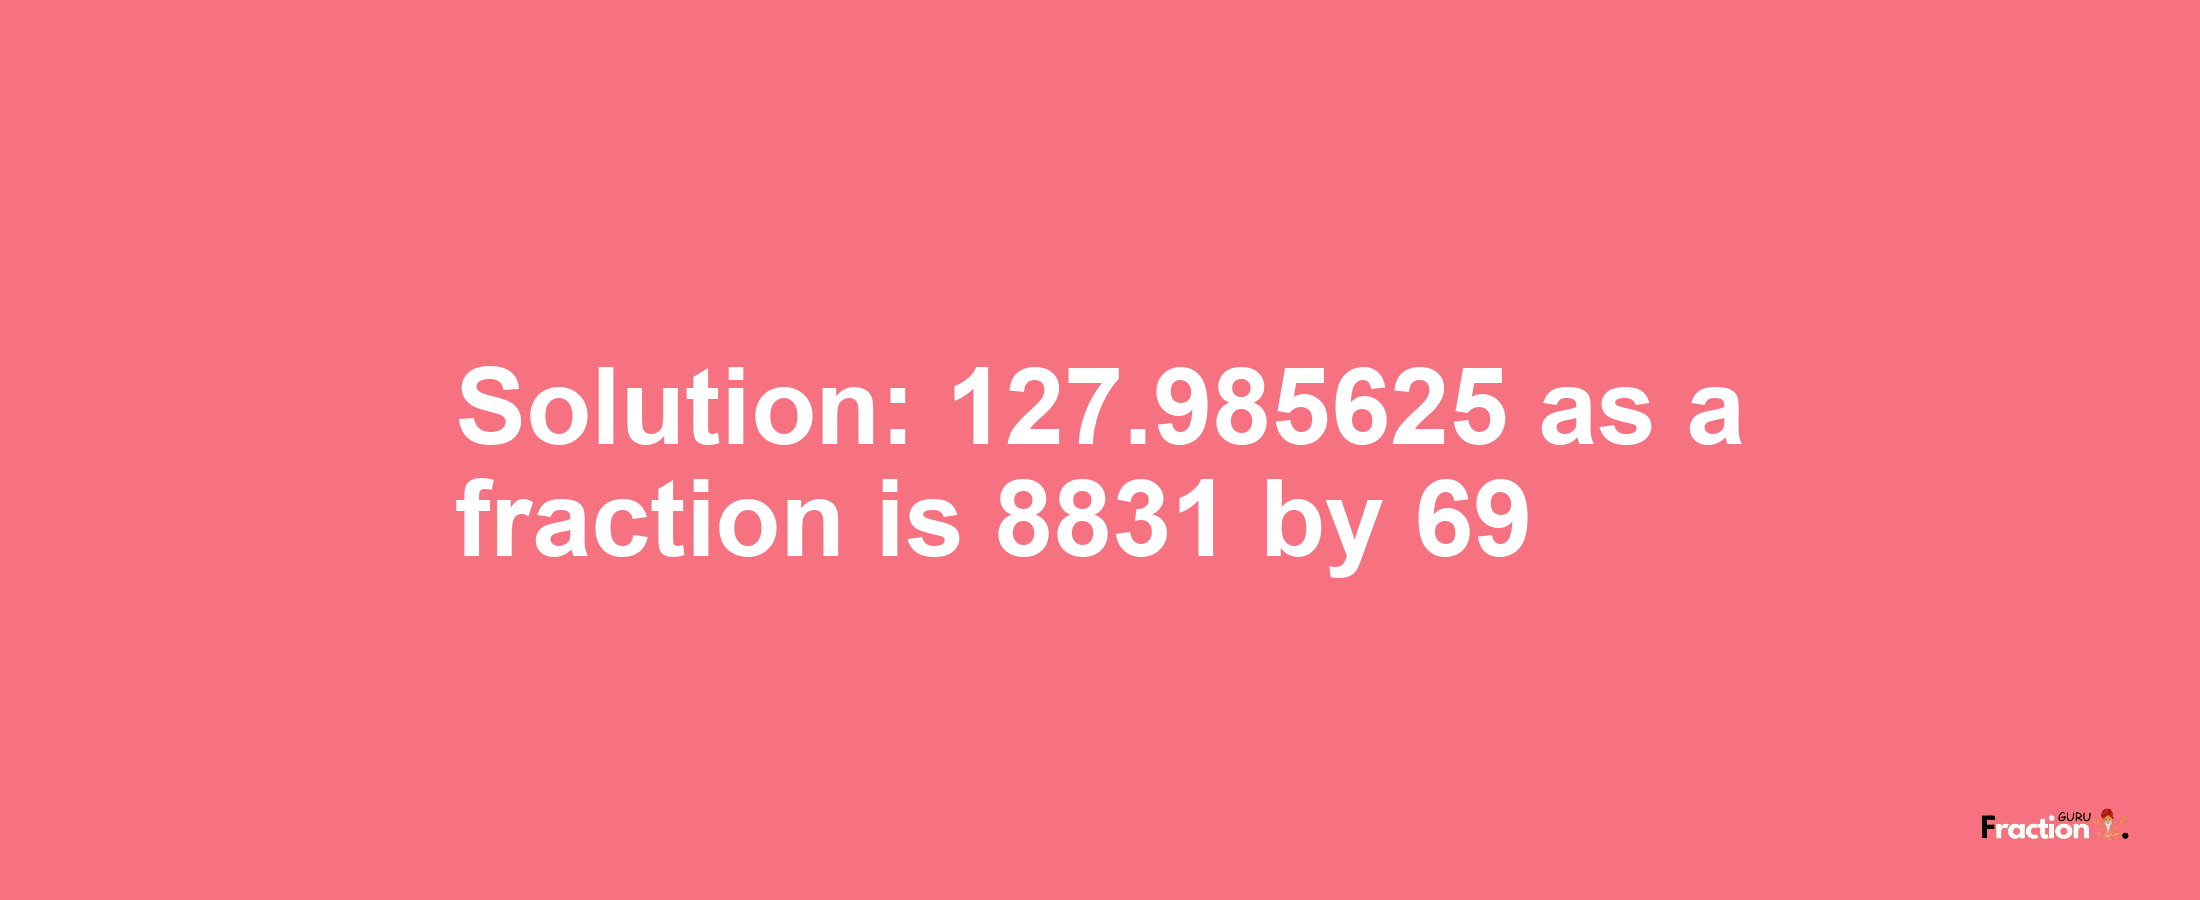 Solution:127.985625 as a fraction is 8831/69